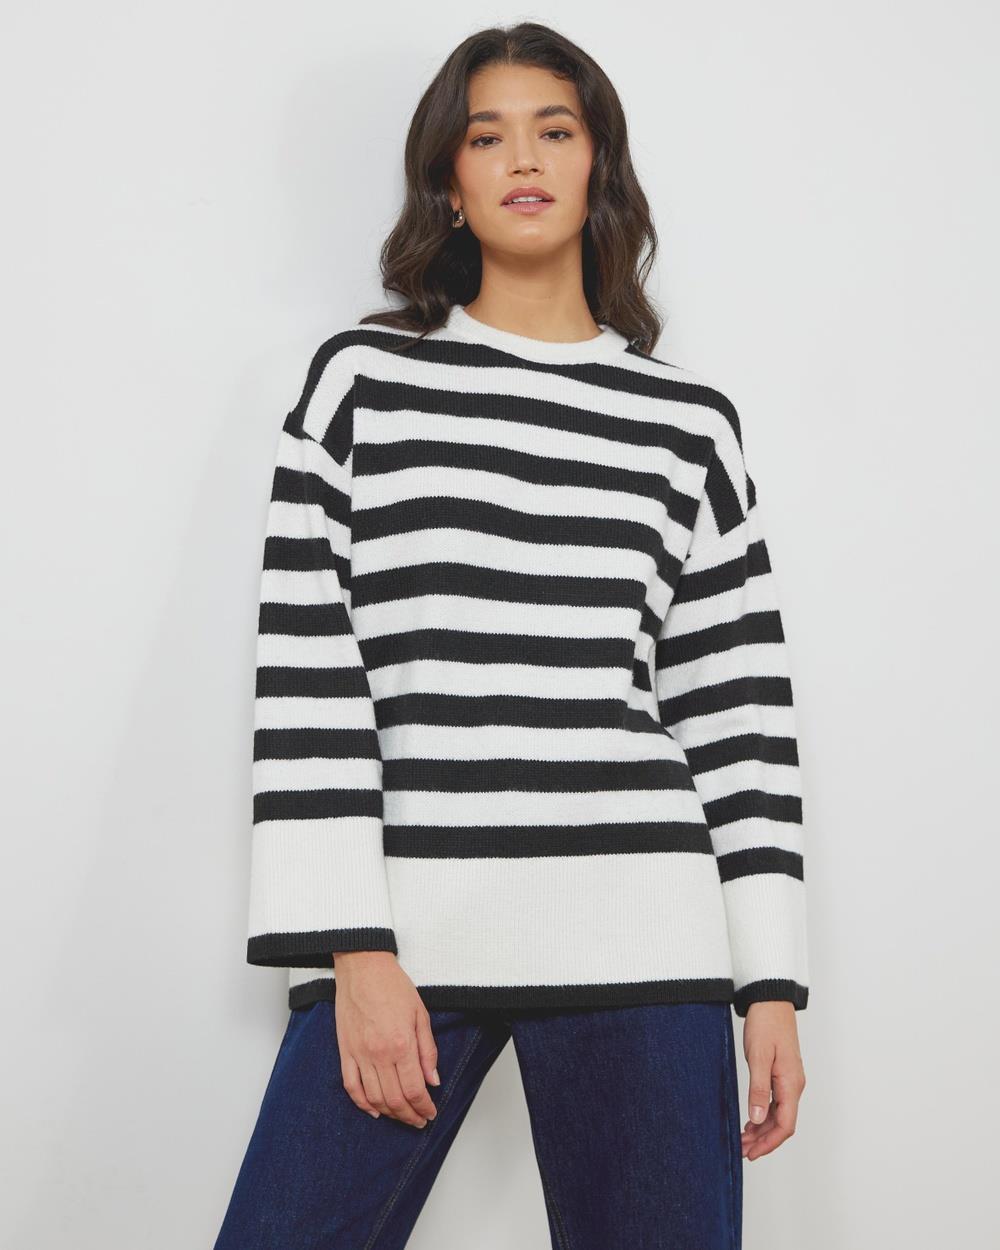 Atmos&Here - Madaline Long Line Stripe Knit Jumper - Jumpers & Cardigans (Cream With Black Stripes) Madaline Long Line Stripe Knit Jumper